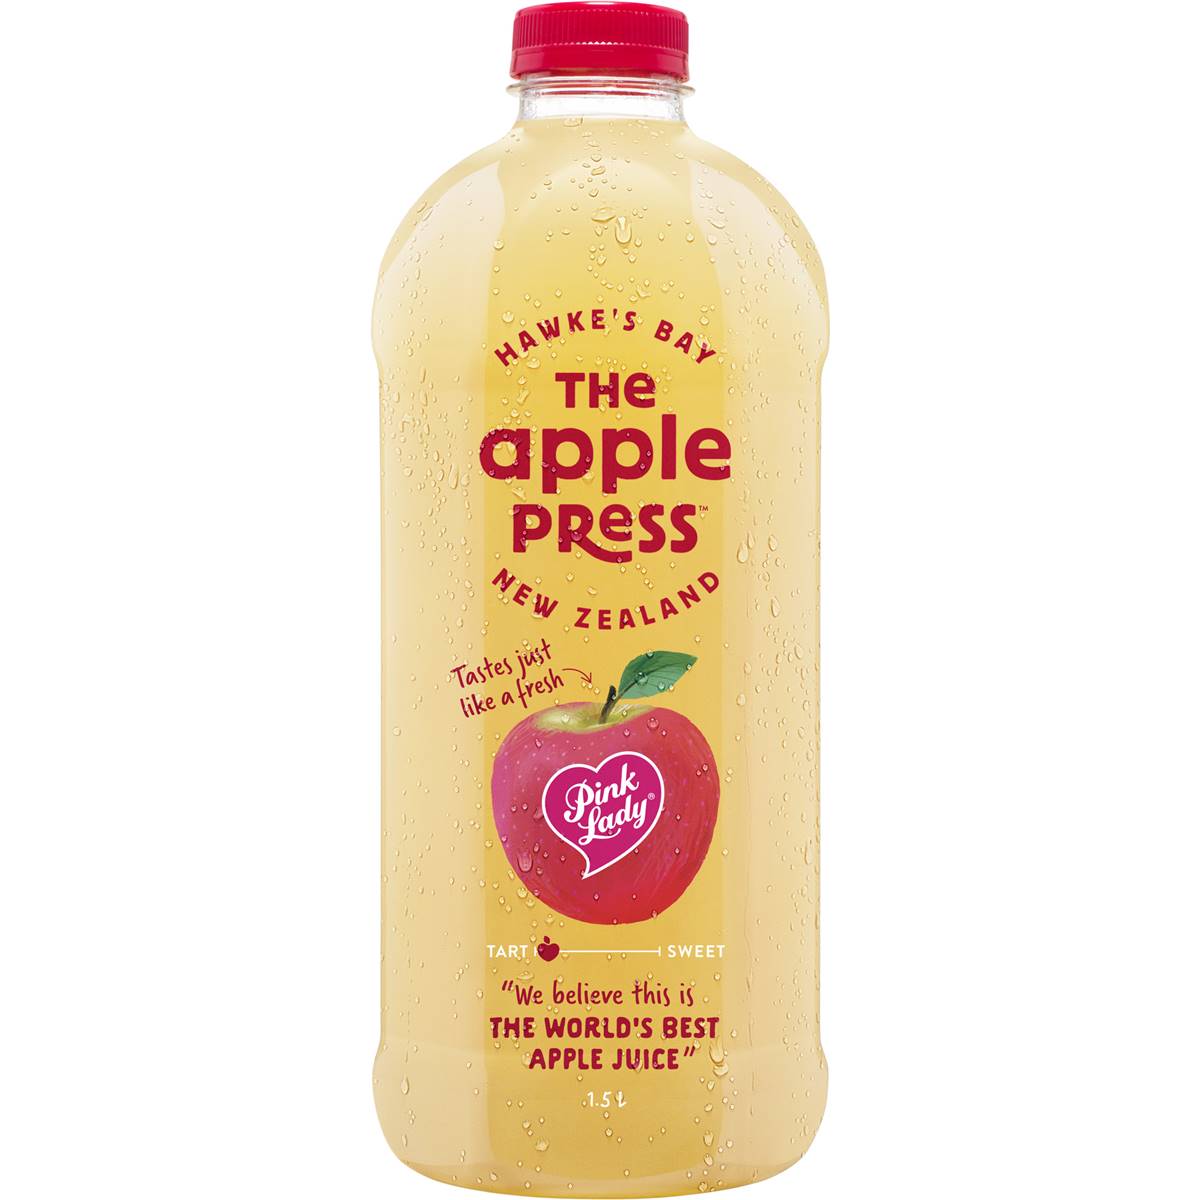 Calories in The Apple Press Pink Lady Cold Pressed Apple